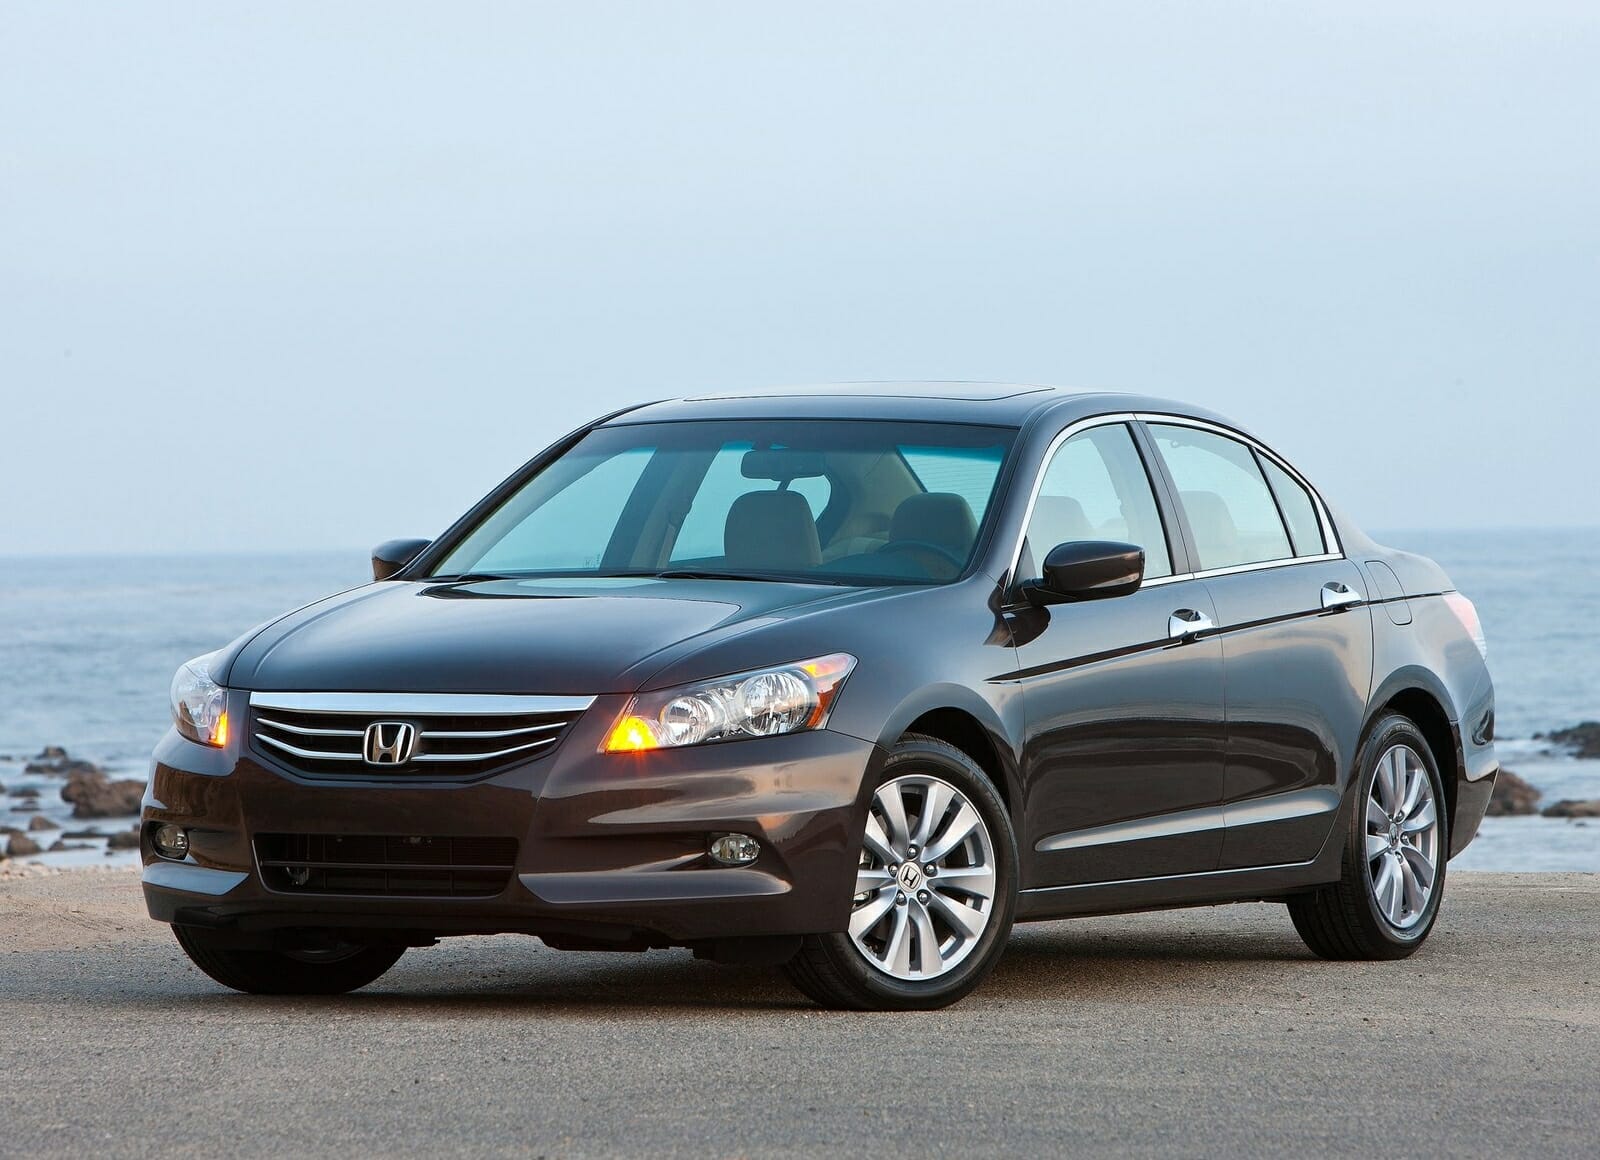 2011 Honda Accord Review: A Fun to Drive Affordable Midsize Car